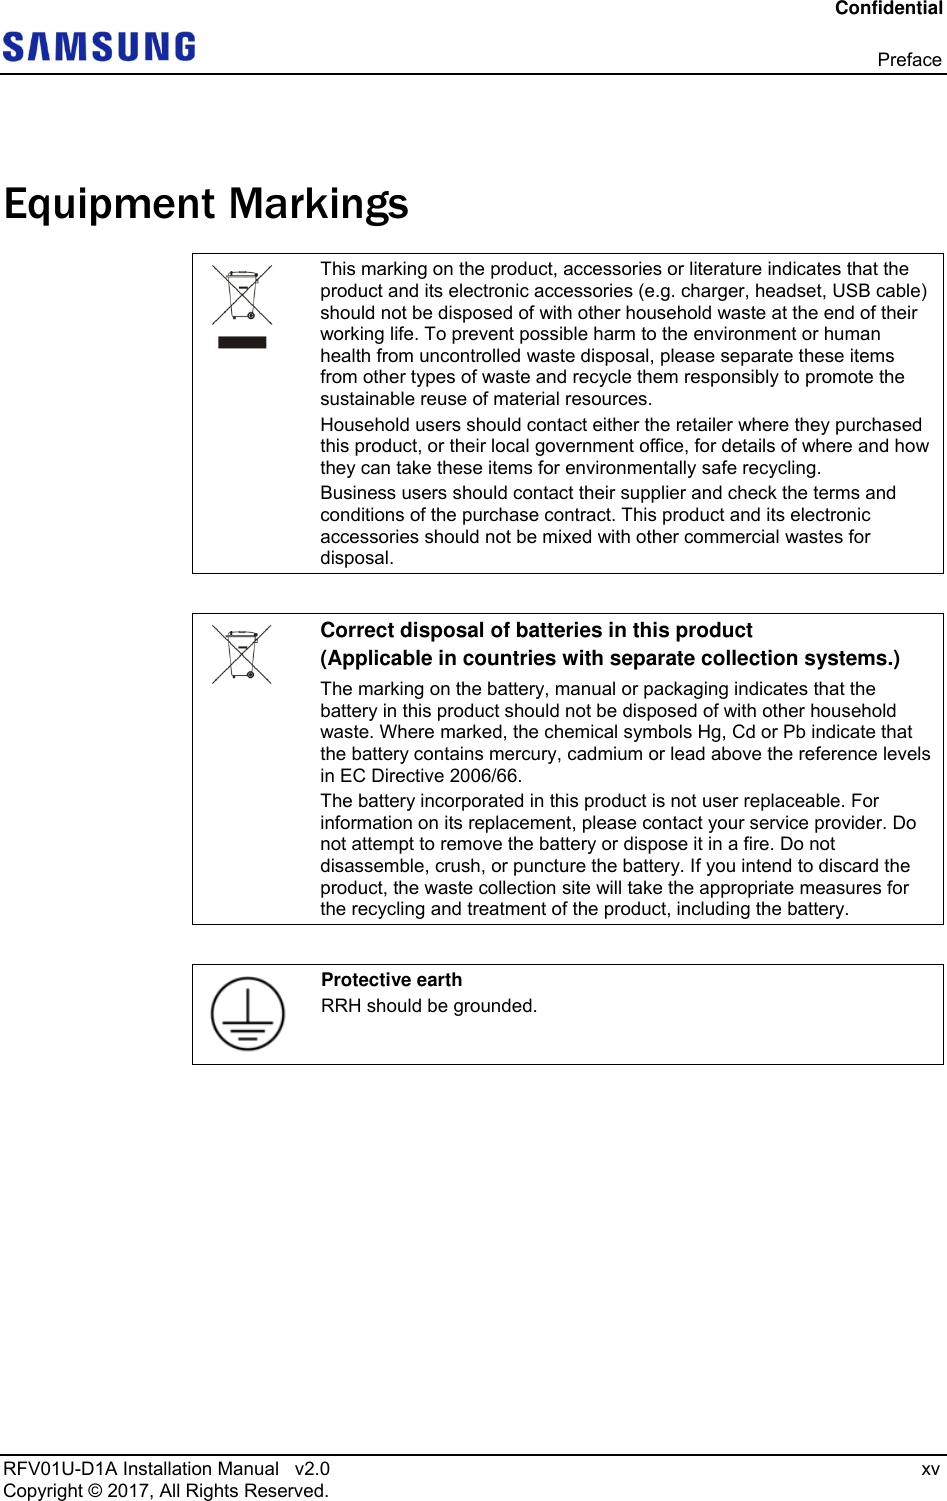 Confidential  Preface RFV01U-D1A Installation Manual   v2.0   xv Copyright © 2017, All Rights Reserved.  Equipment Markings  This marking on the product, accessories or literature indicates that the product and its electronic accessories (e.g. charger, headset, USB cable) should not be disposed of with other household waste at the end of their working life. To prevent possible harm to the environment or human health from uncontrolled waste disposal, please separate these items from other types of waste and recycle them responsibly to promote the sustainable reuse of material resources. Household users should contact either the retailer where they purchased this product, or their local government office, for details of where and how they can take these items for environmentally safe recycling.  Business users should contact their supplier and check the terms and conditions of the purchase contract. This product and its electronic accessories should not be mixed with other commercial wastes for disposal.   Correct disposal of batteries in this product (Applicable in countries with separate collection systems.)  The marking on the battery, manual or packaging indicates that the battery in this product should not be disposed of with other household waste. Where marked, the chemical symbols Hg, Cd or Pb indicate that the battery contains mercury, cadmium or lead above the reference levels in EC Directive 2006/66.  The battery incorporated in this product is not user replaceable. For information on its replacement, please contact your service provider. Do not attempt to remove the battery or dispose it in a fire. Do not disassemble, crush, or puncture the battery. If you intend to discard the product, the waste collection site will take the appropriate measures for the recycling and treatment of the product, including the battery.   Protective earth RRH should be grounded.  